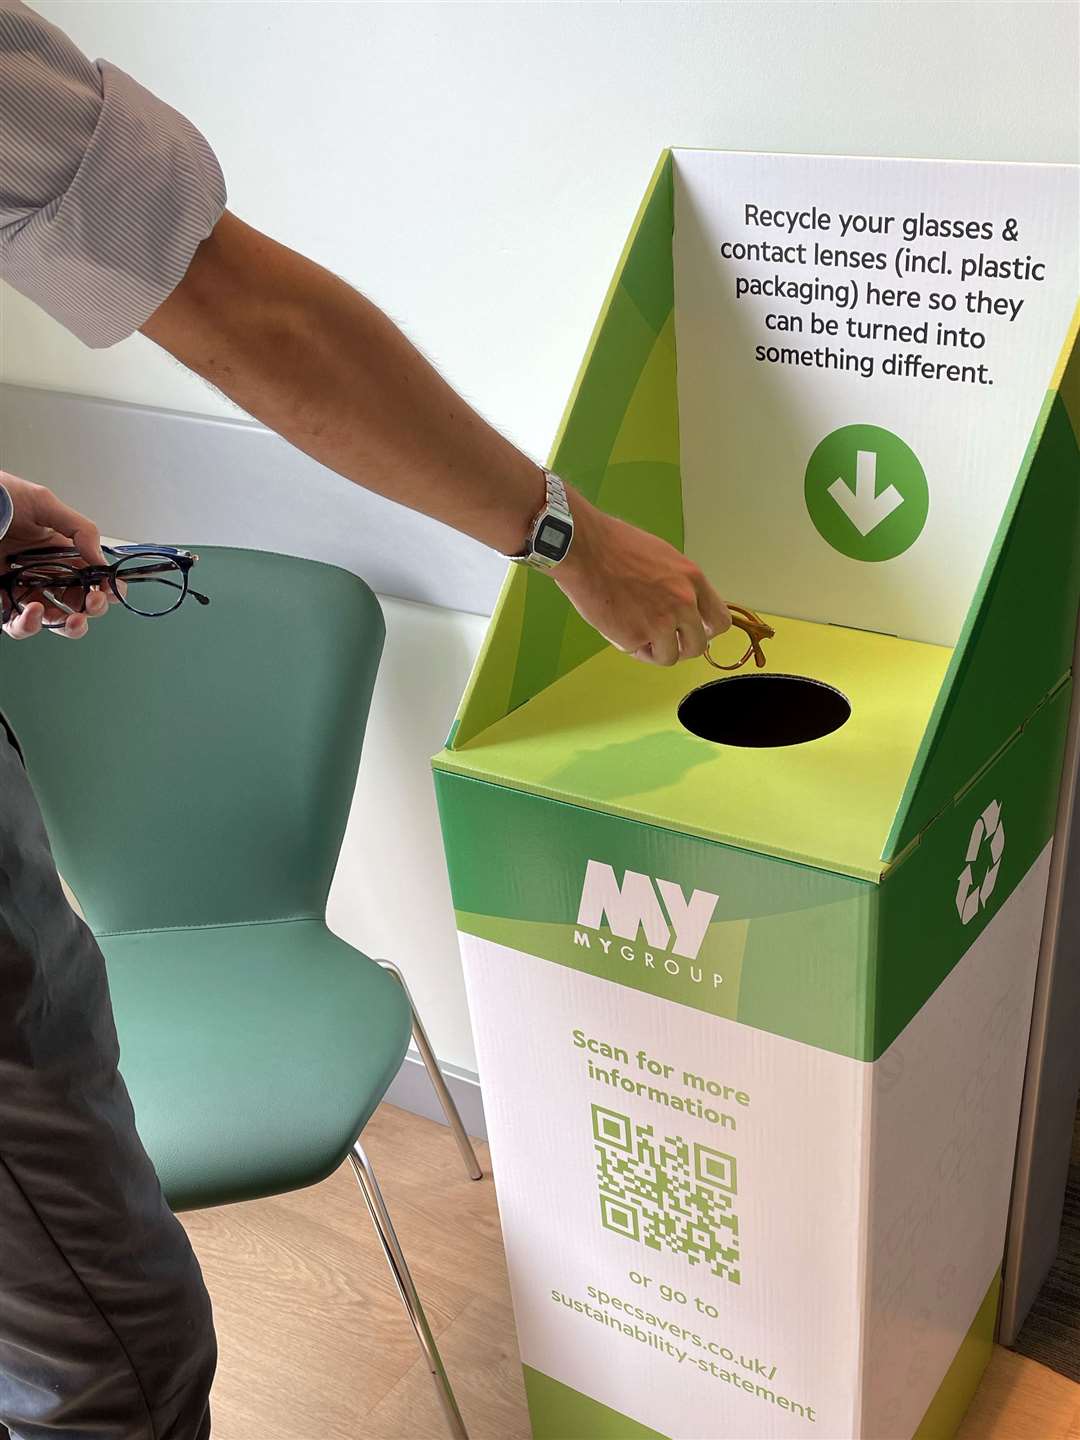 Glasses and contact lenses can now be recycled in the Ellon Specsavers store.